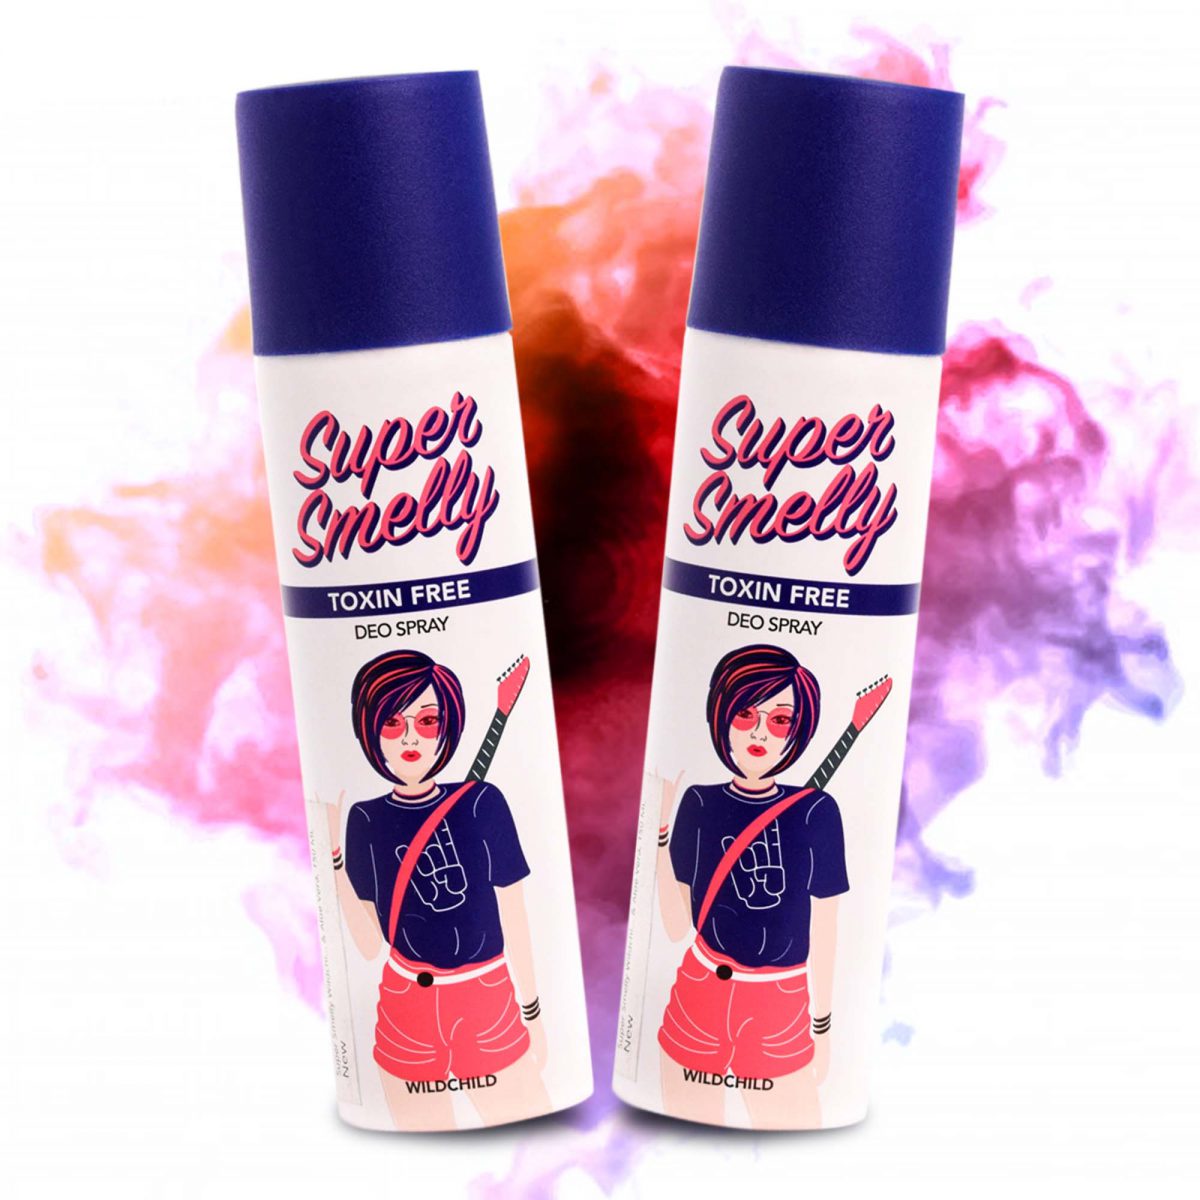 supersmelly Wild Child Deodorant Pack of 2 150ml | teen deo | deodorant combo pack | underarm deodorant for girls | underarm deodorant for womens | best deodorant for sweat | ladis deo | ladis deodorant best ladis deo in india | buy deodorant online india Buy Women's Deo Online | best natural women's deodorant | deodorant for girls | girls deodorant | teen deodorant | tween deo | tween deodorant | teenage deodorant | buy girls deo online